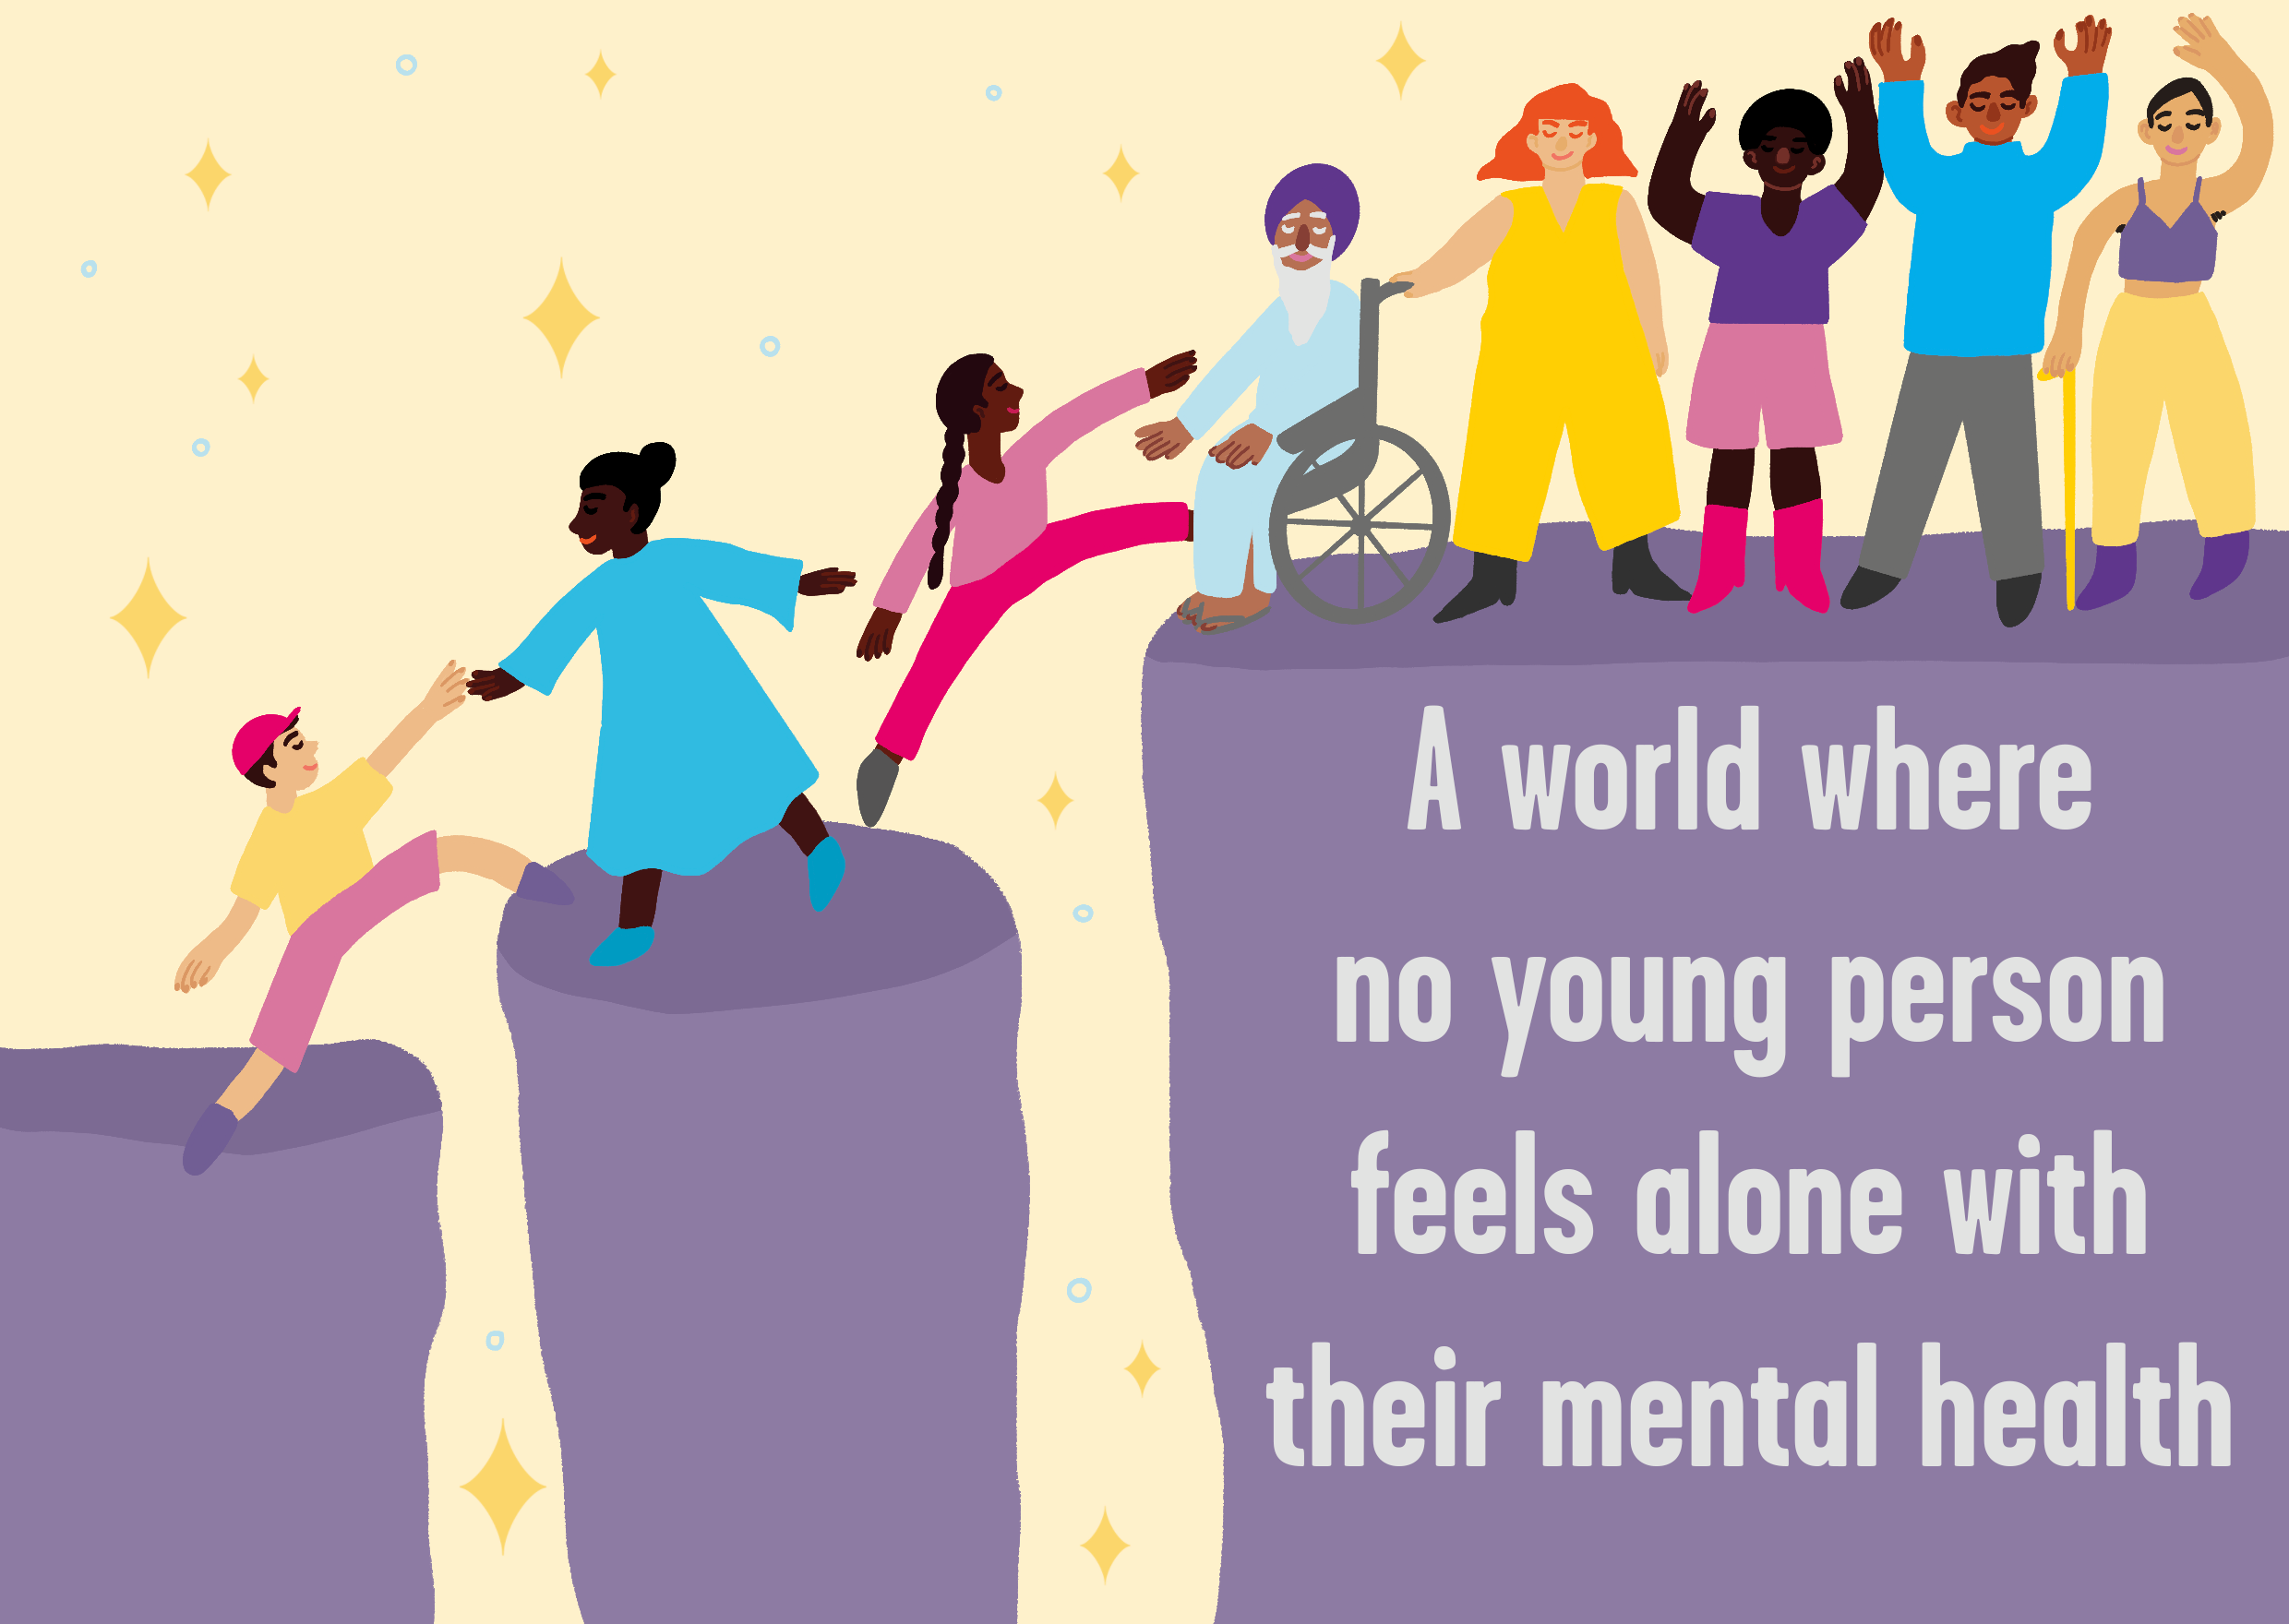 A group of people at the top of a purple block are helping three others climb onto their block. The text on the big purple block reads 'a world where no young person feels alone with their mental health'.